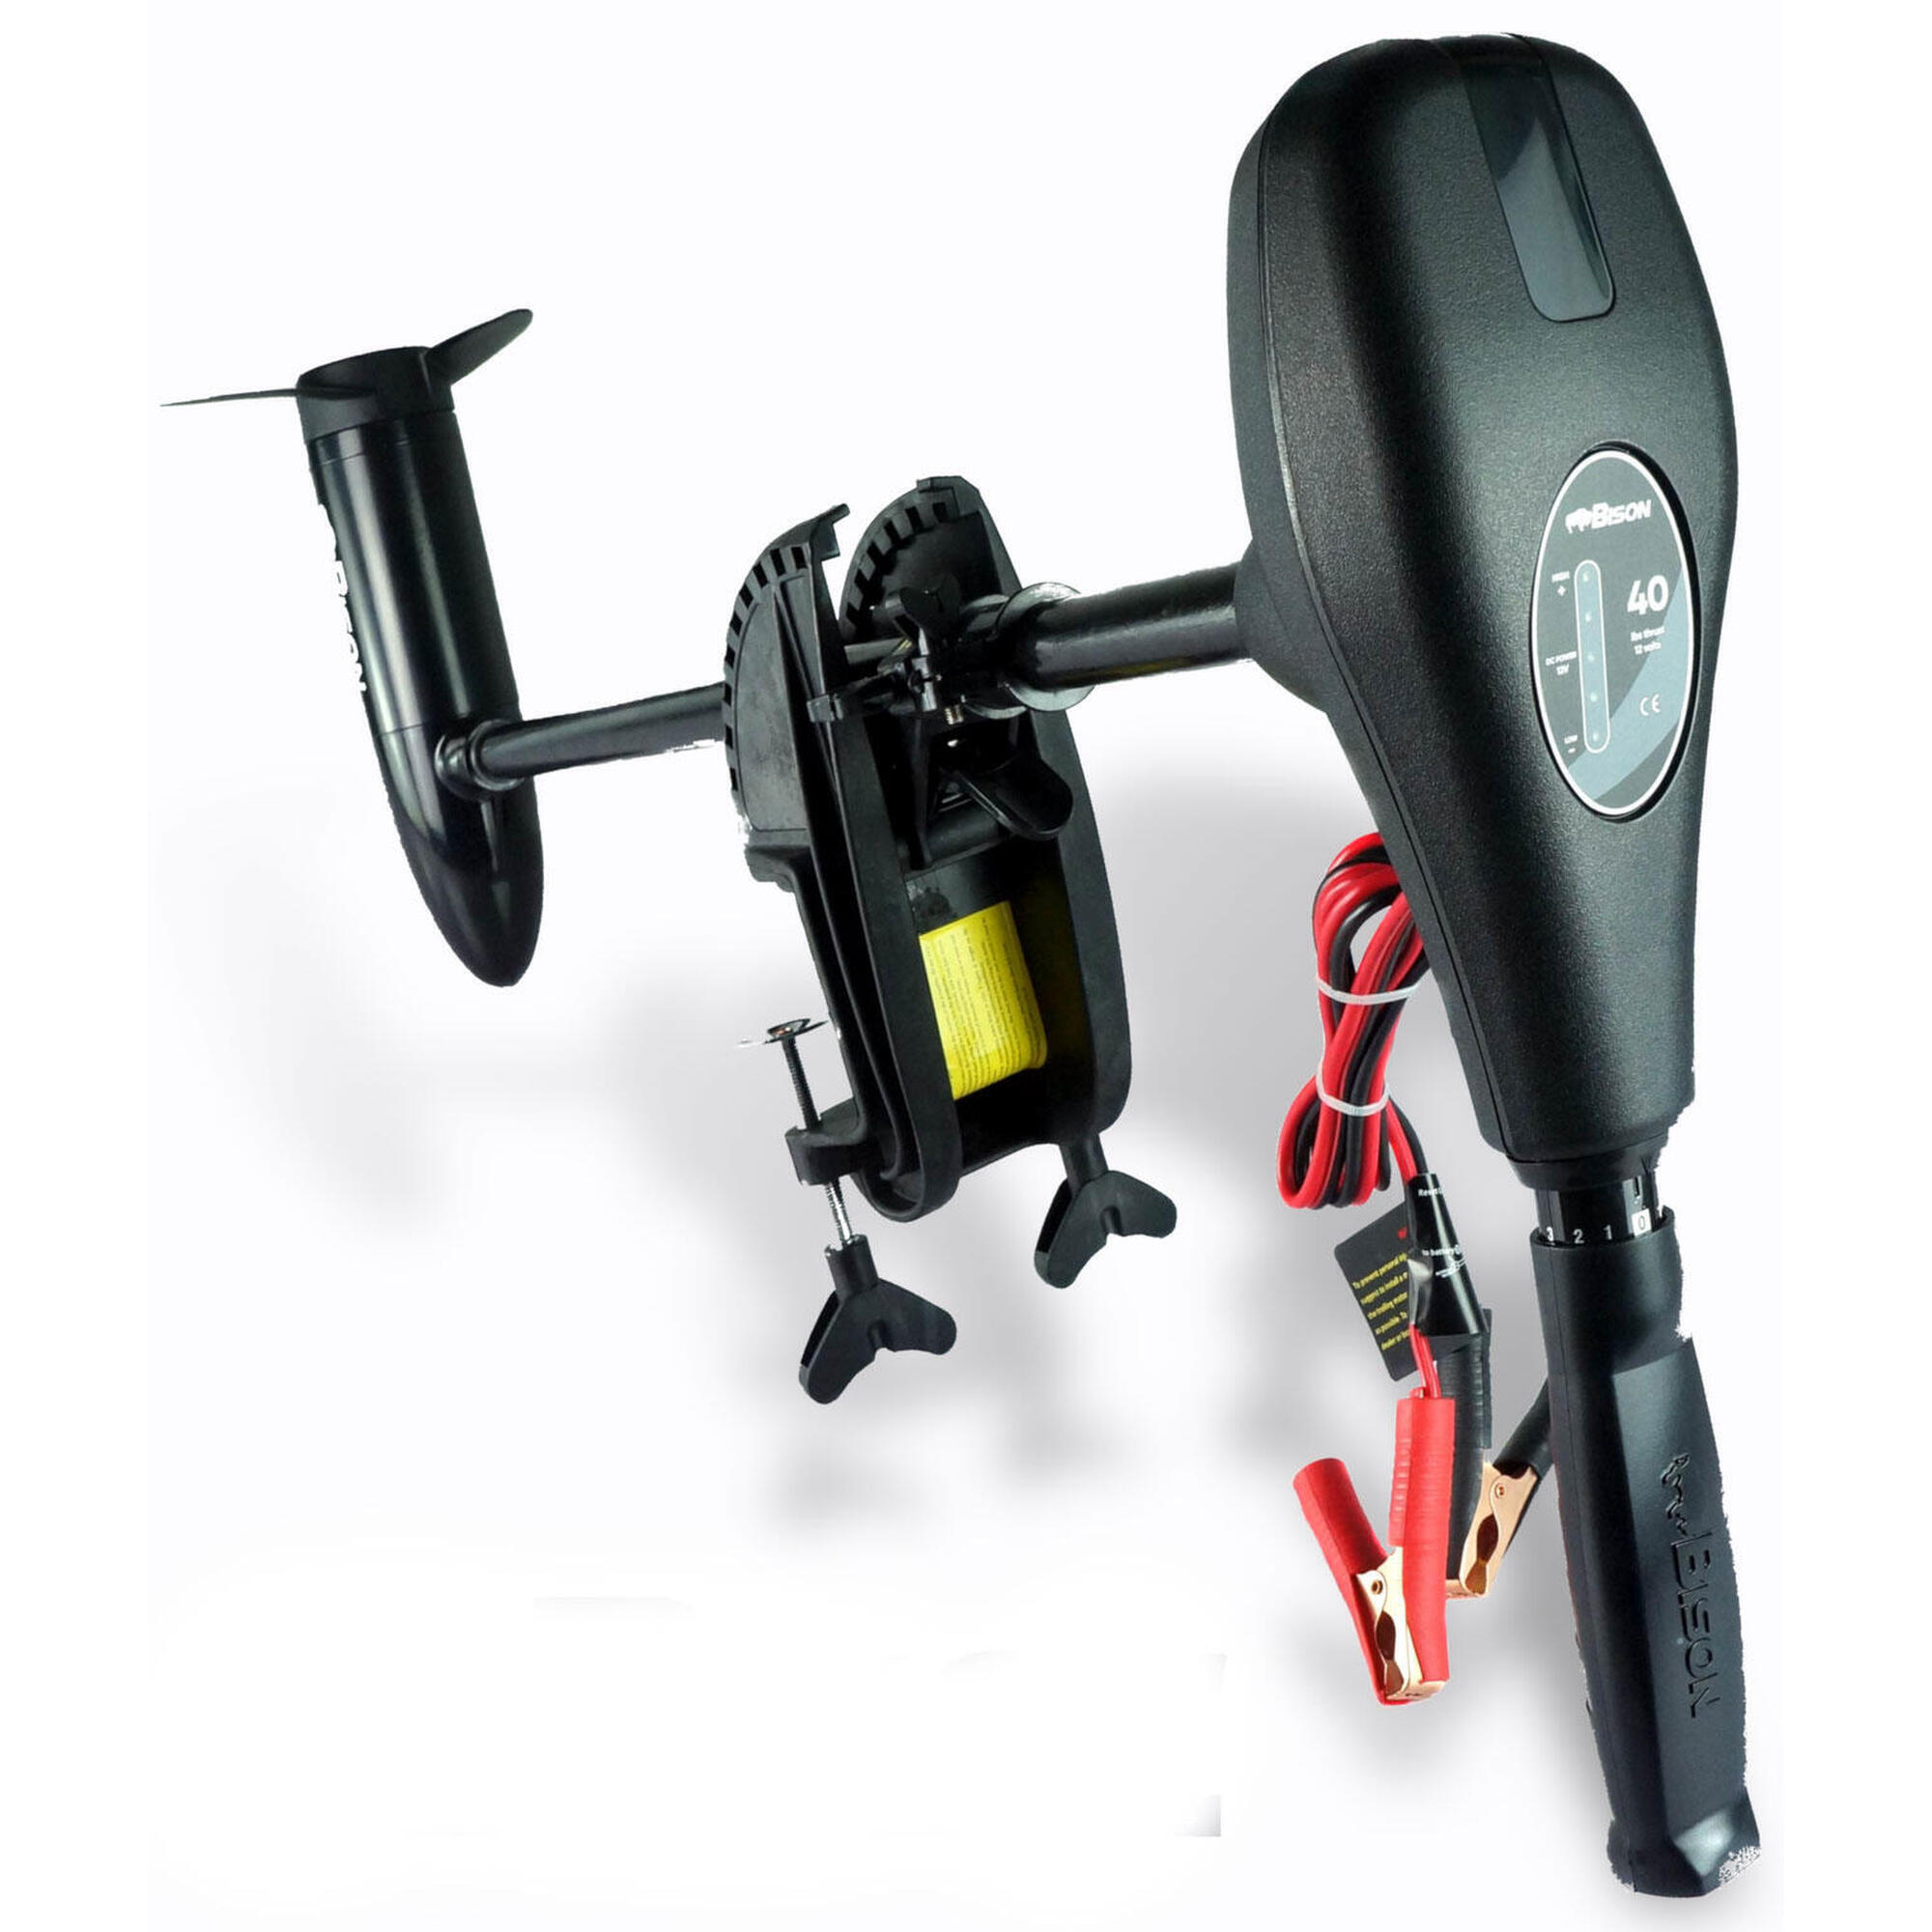 BISON 40lb Electric Outboard Motor